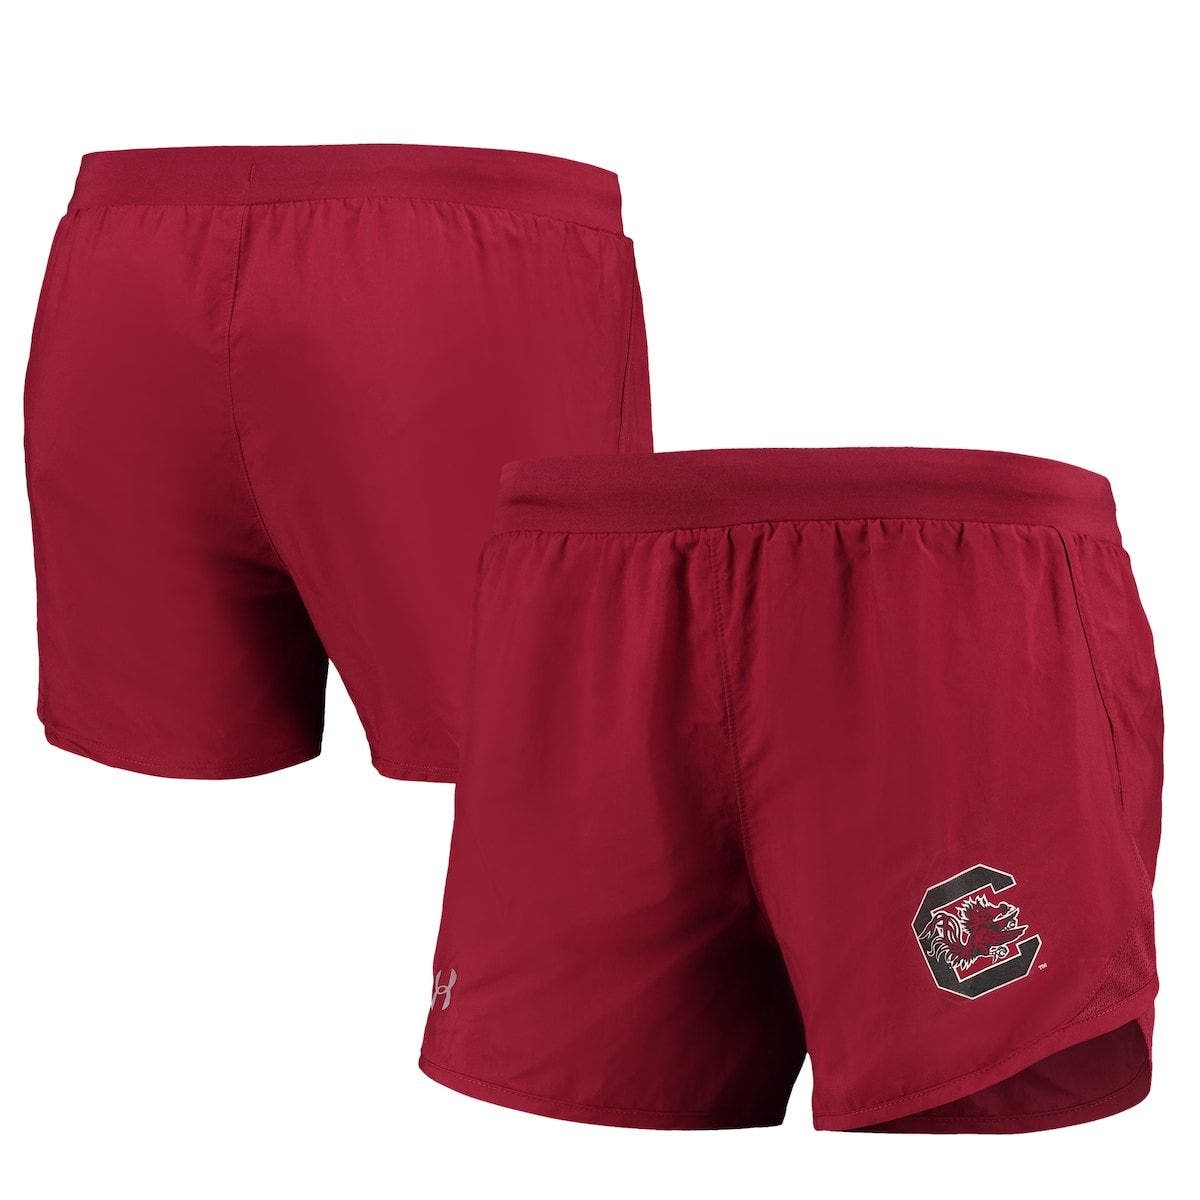 rugby Reduced to clear Sport undershorts football skins new kids adult support 